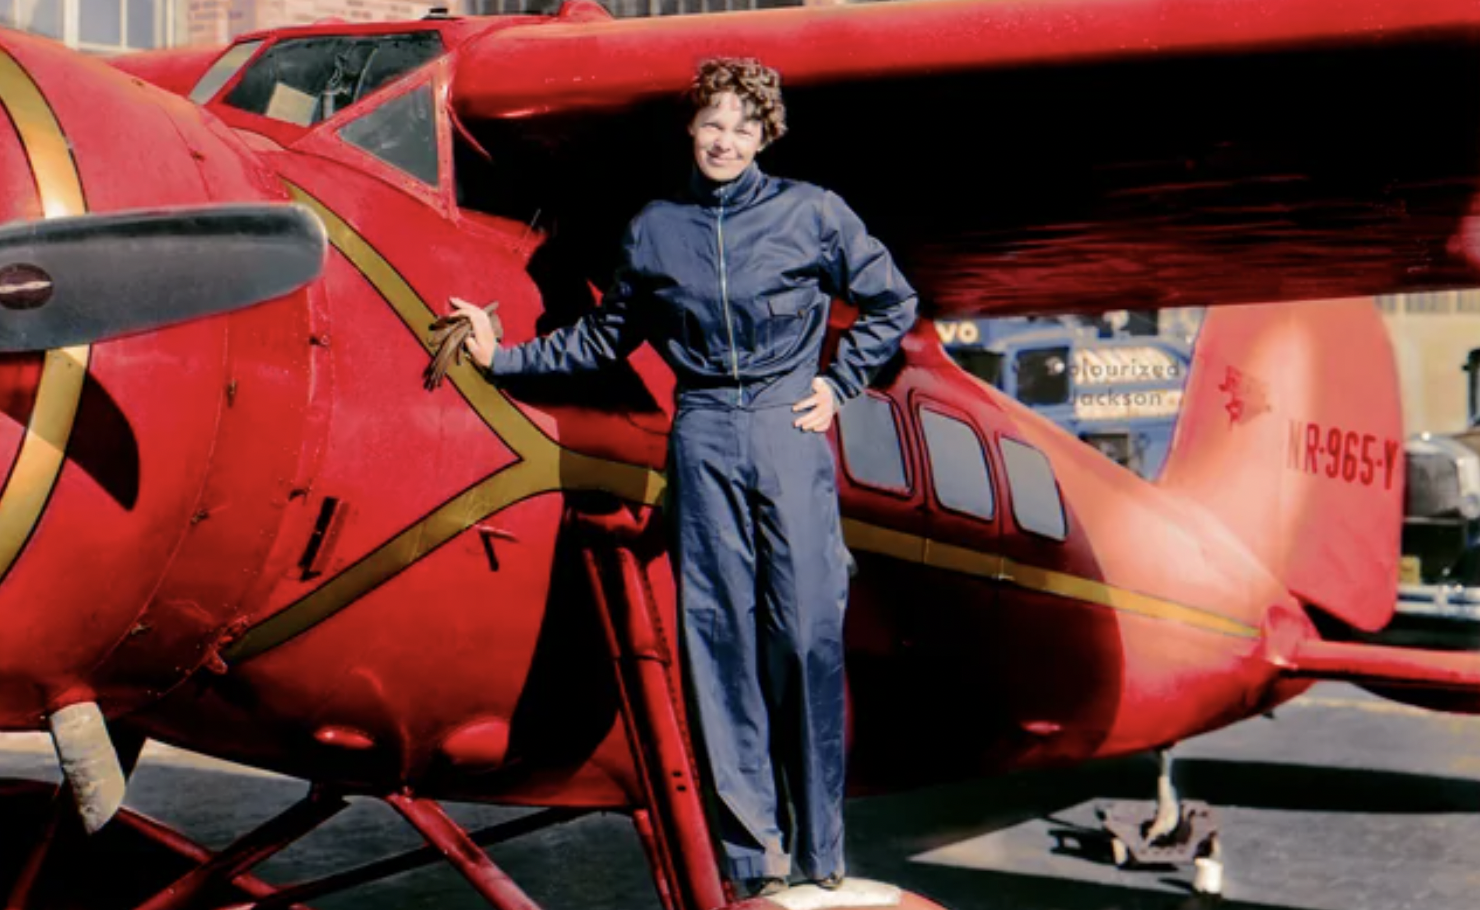 Amelia Earhart photographed by her plane in 1932.